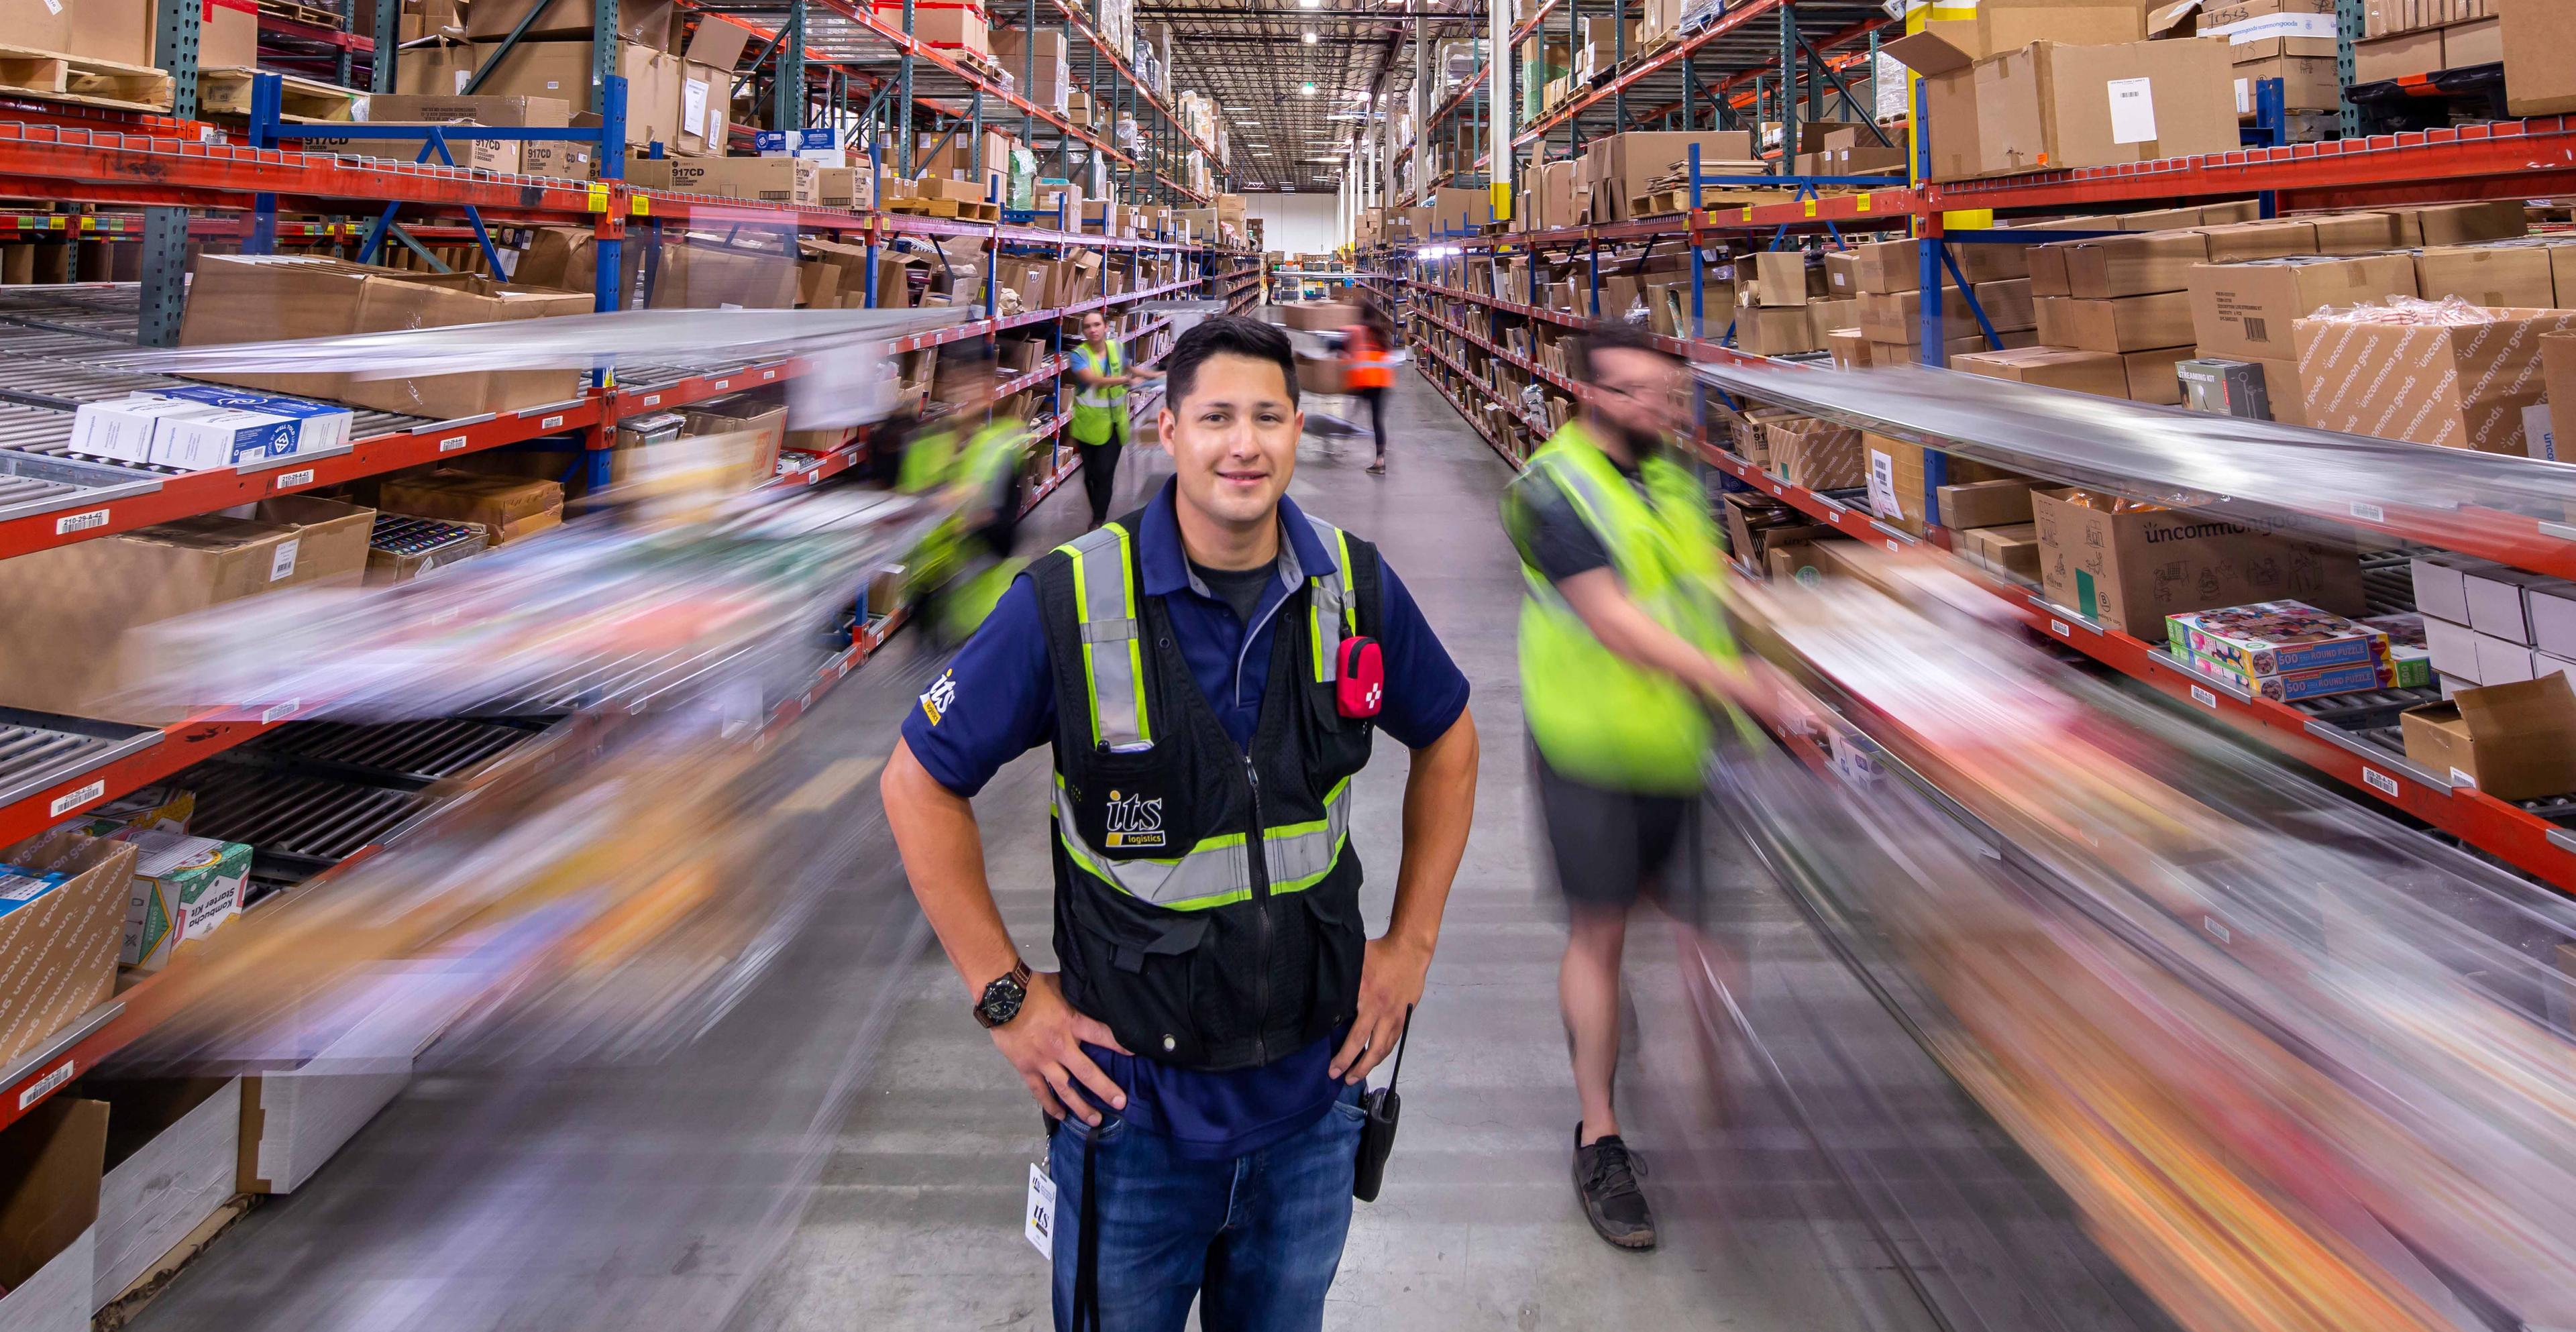 ITS Logistics team member featured in a bustling warehouse